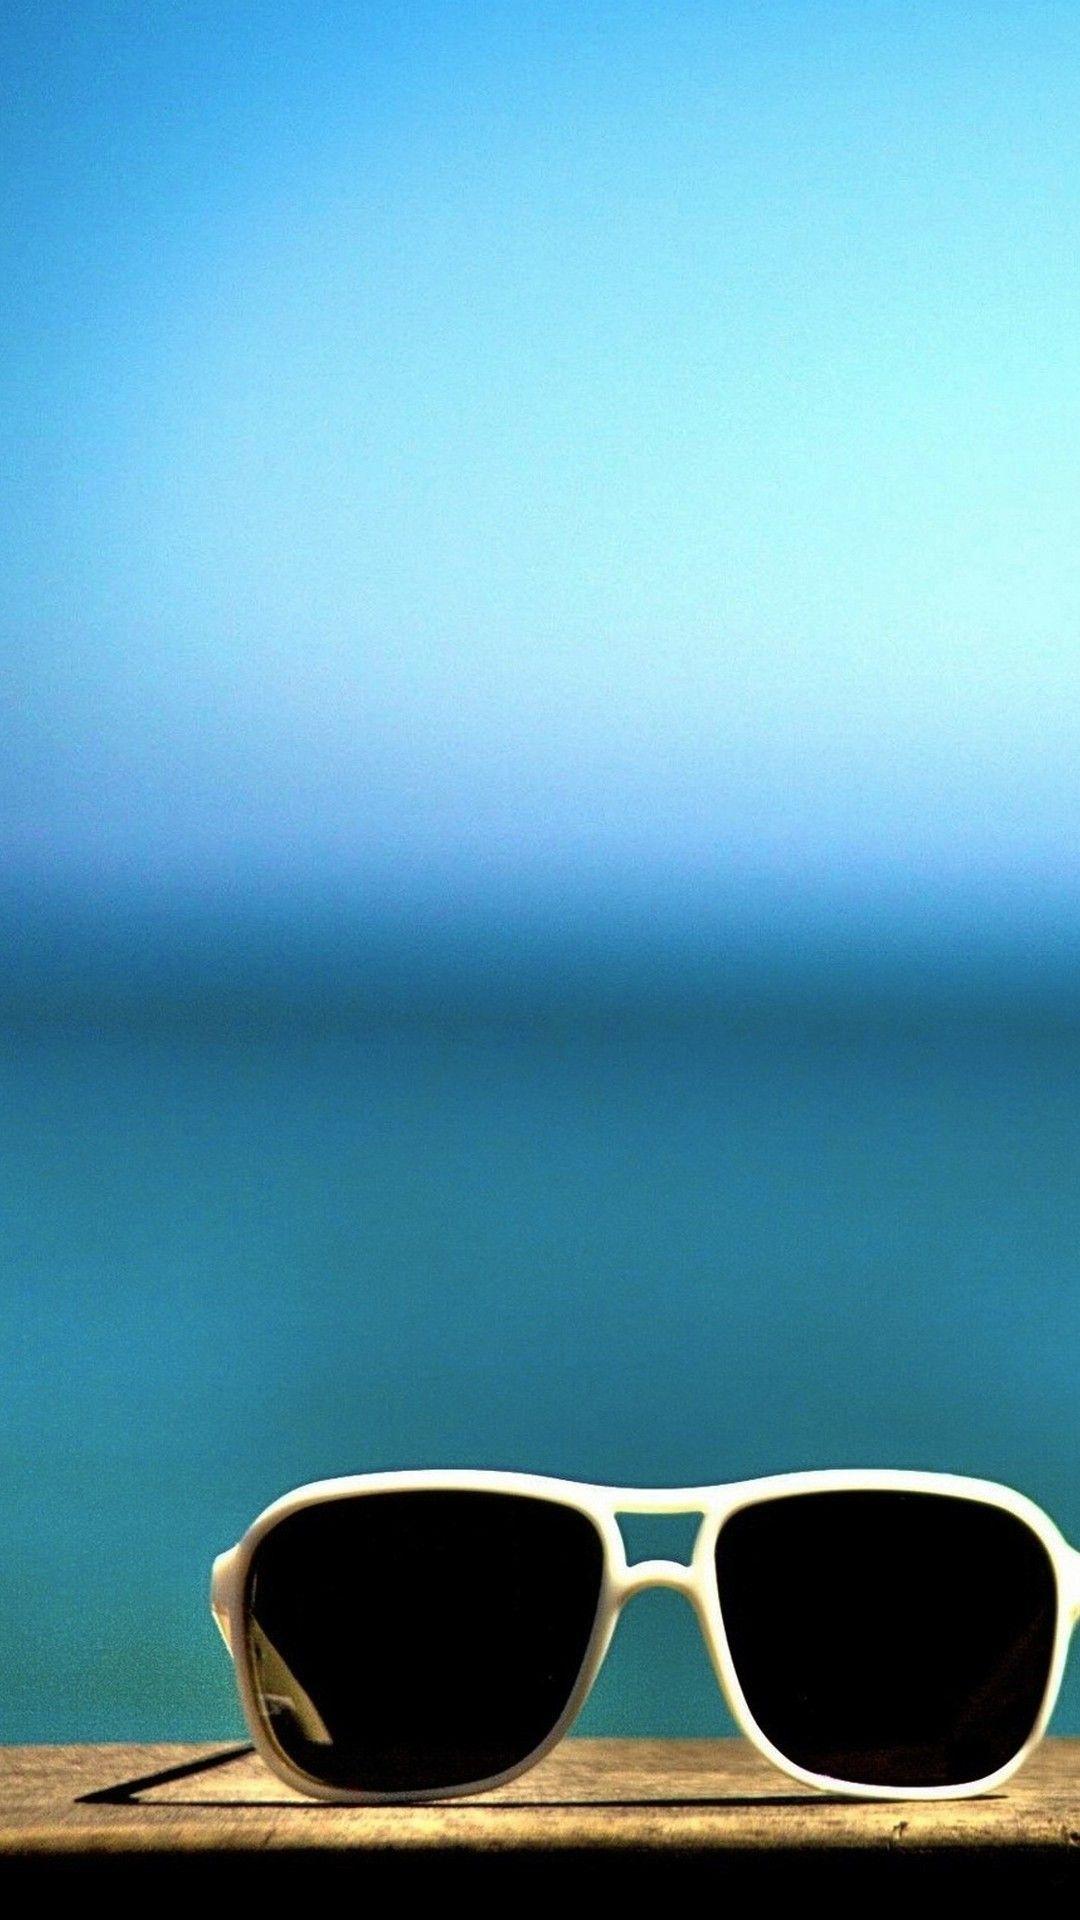 Sunglasses Wallpaper For Android iPhone Wallpaper. iPhone